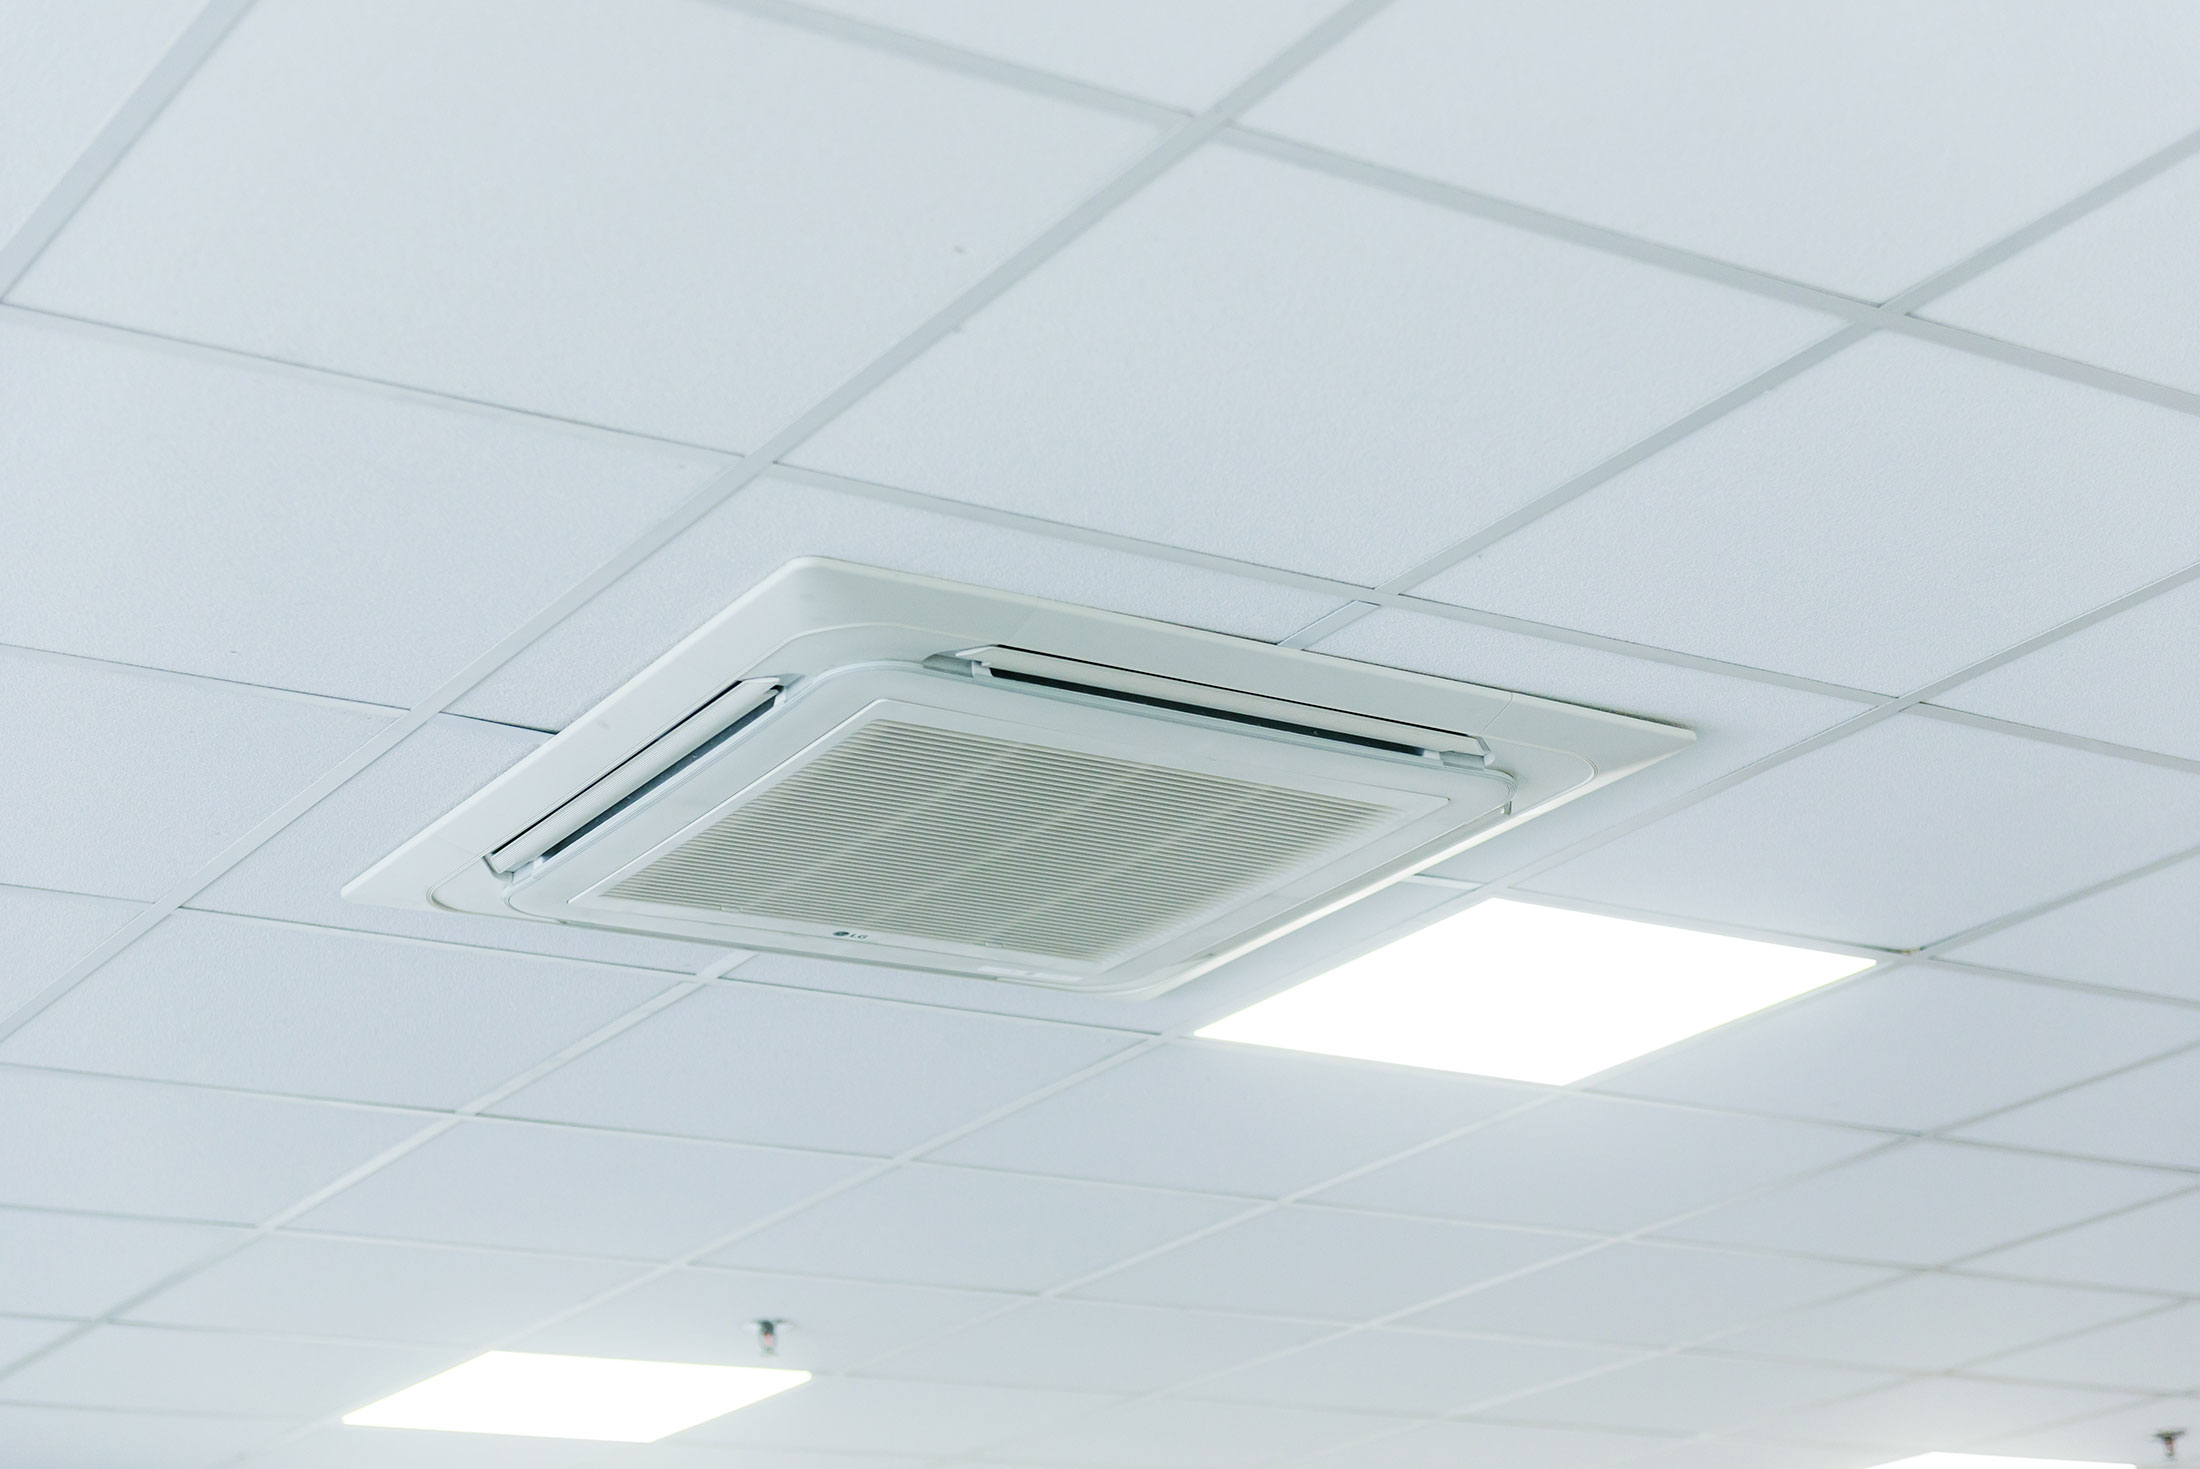 Commercial air conditioning system